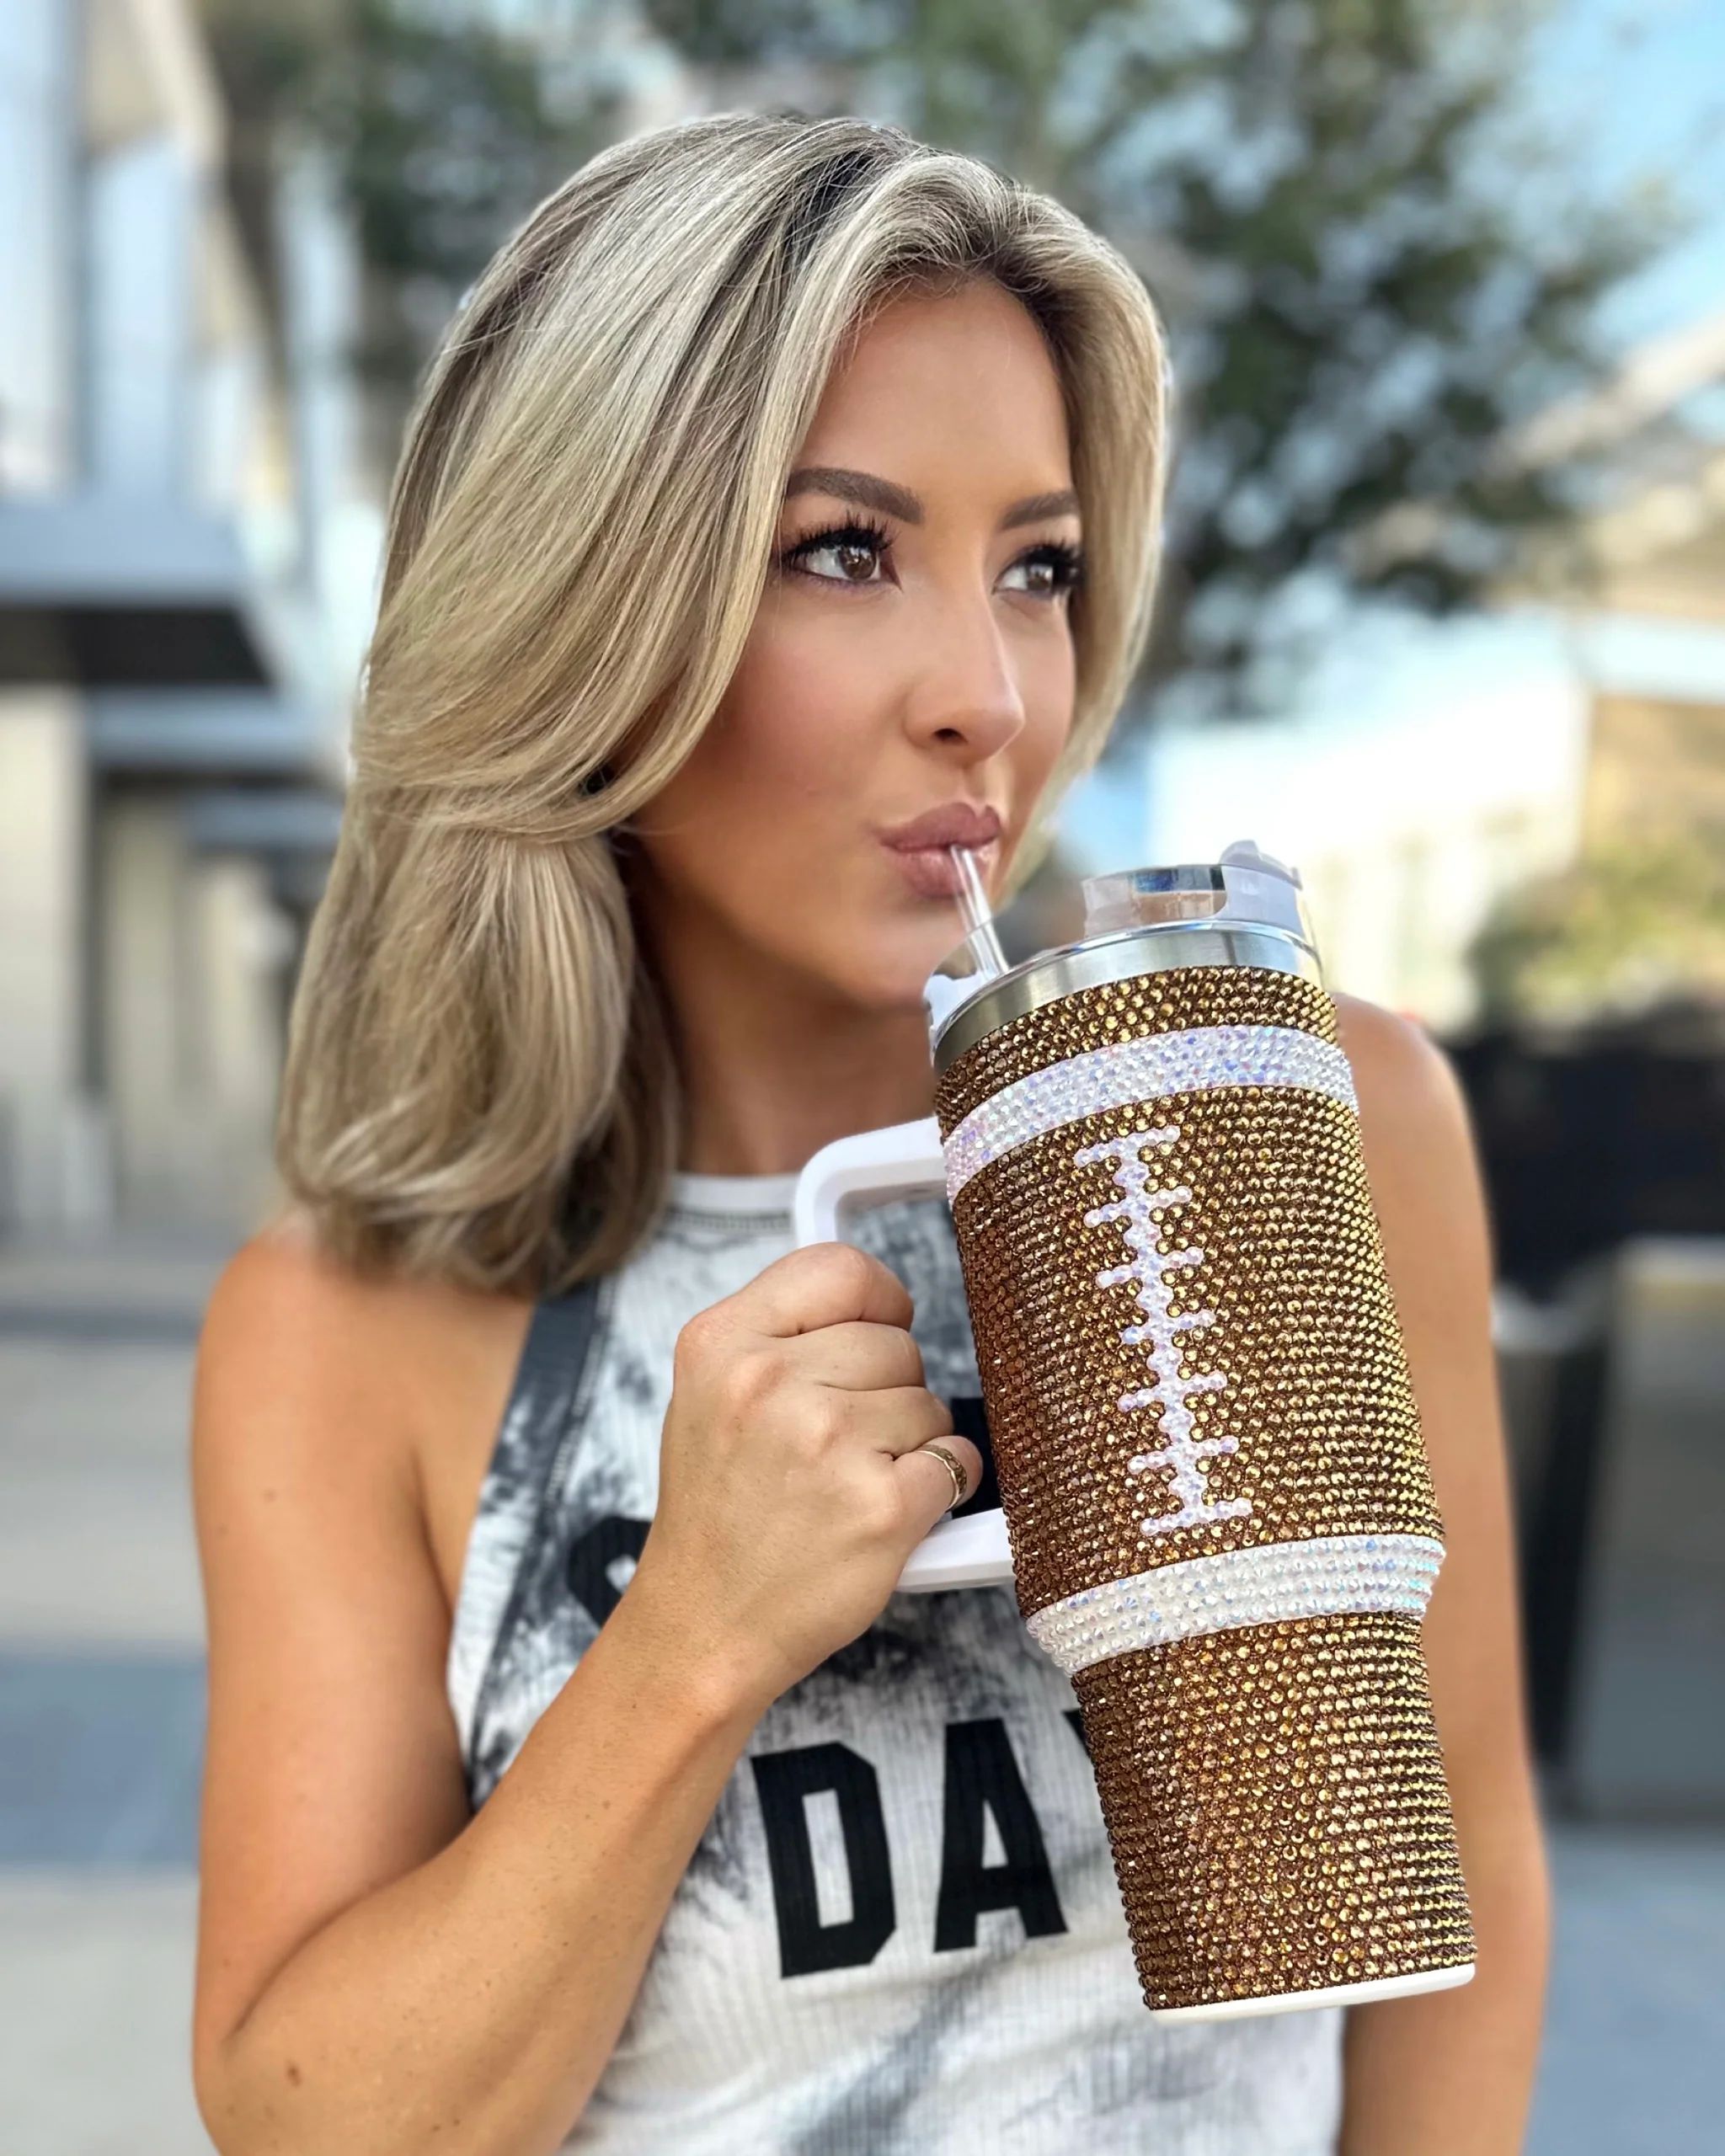 Crystal Football "Blinged Out" 40 Oz. Tumbler | Live Love Gameday®